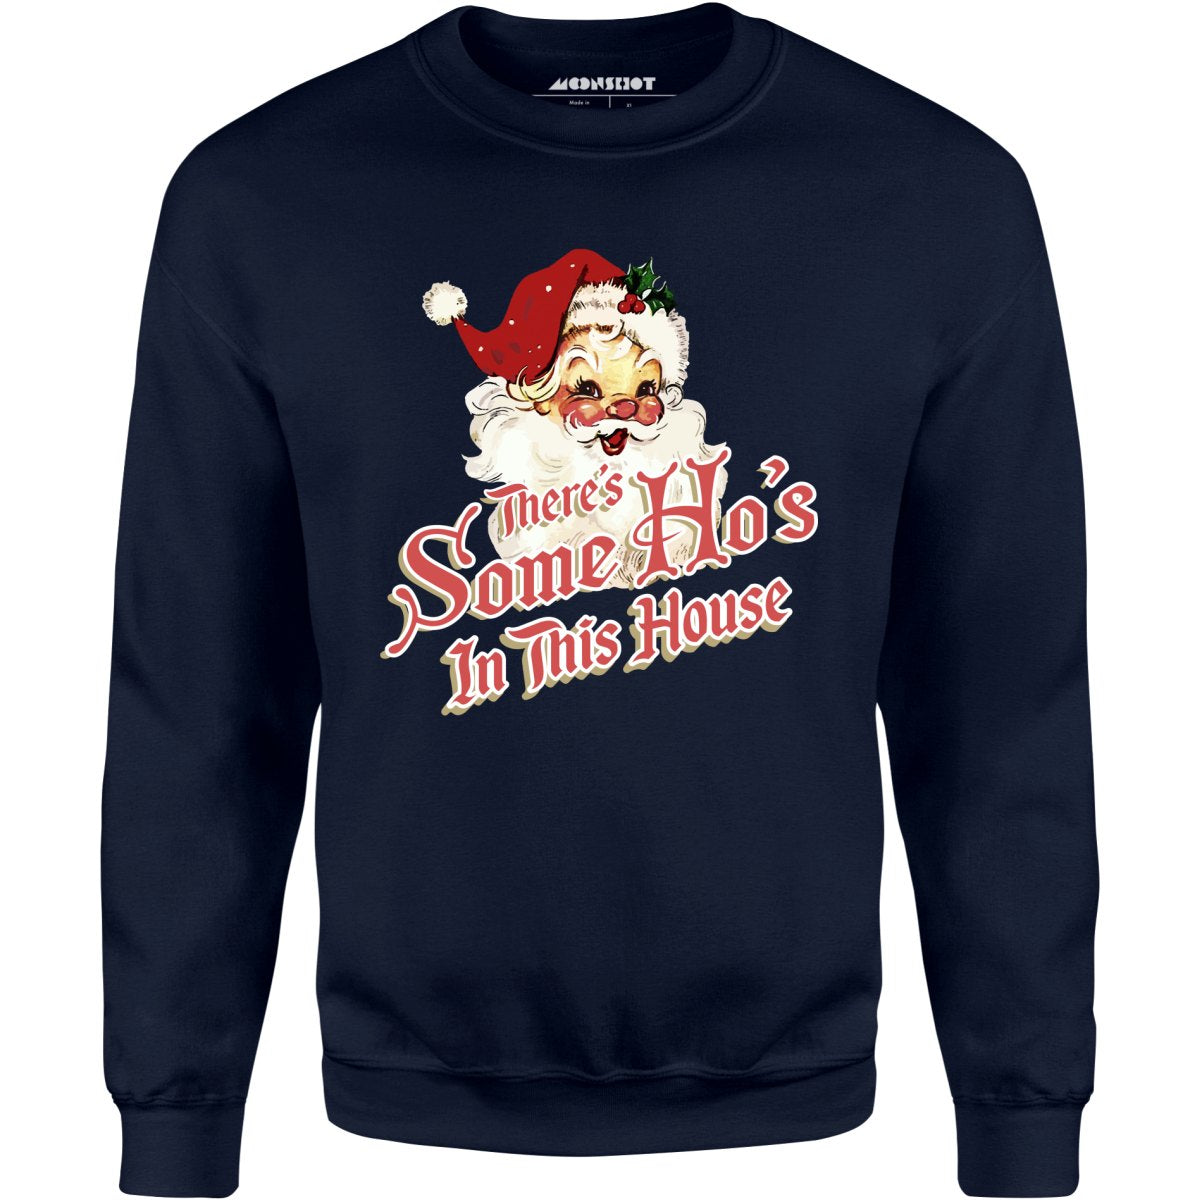 There's Some Ho's in this House - Unisex Sweatshirt